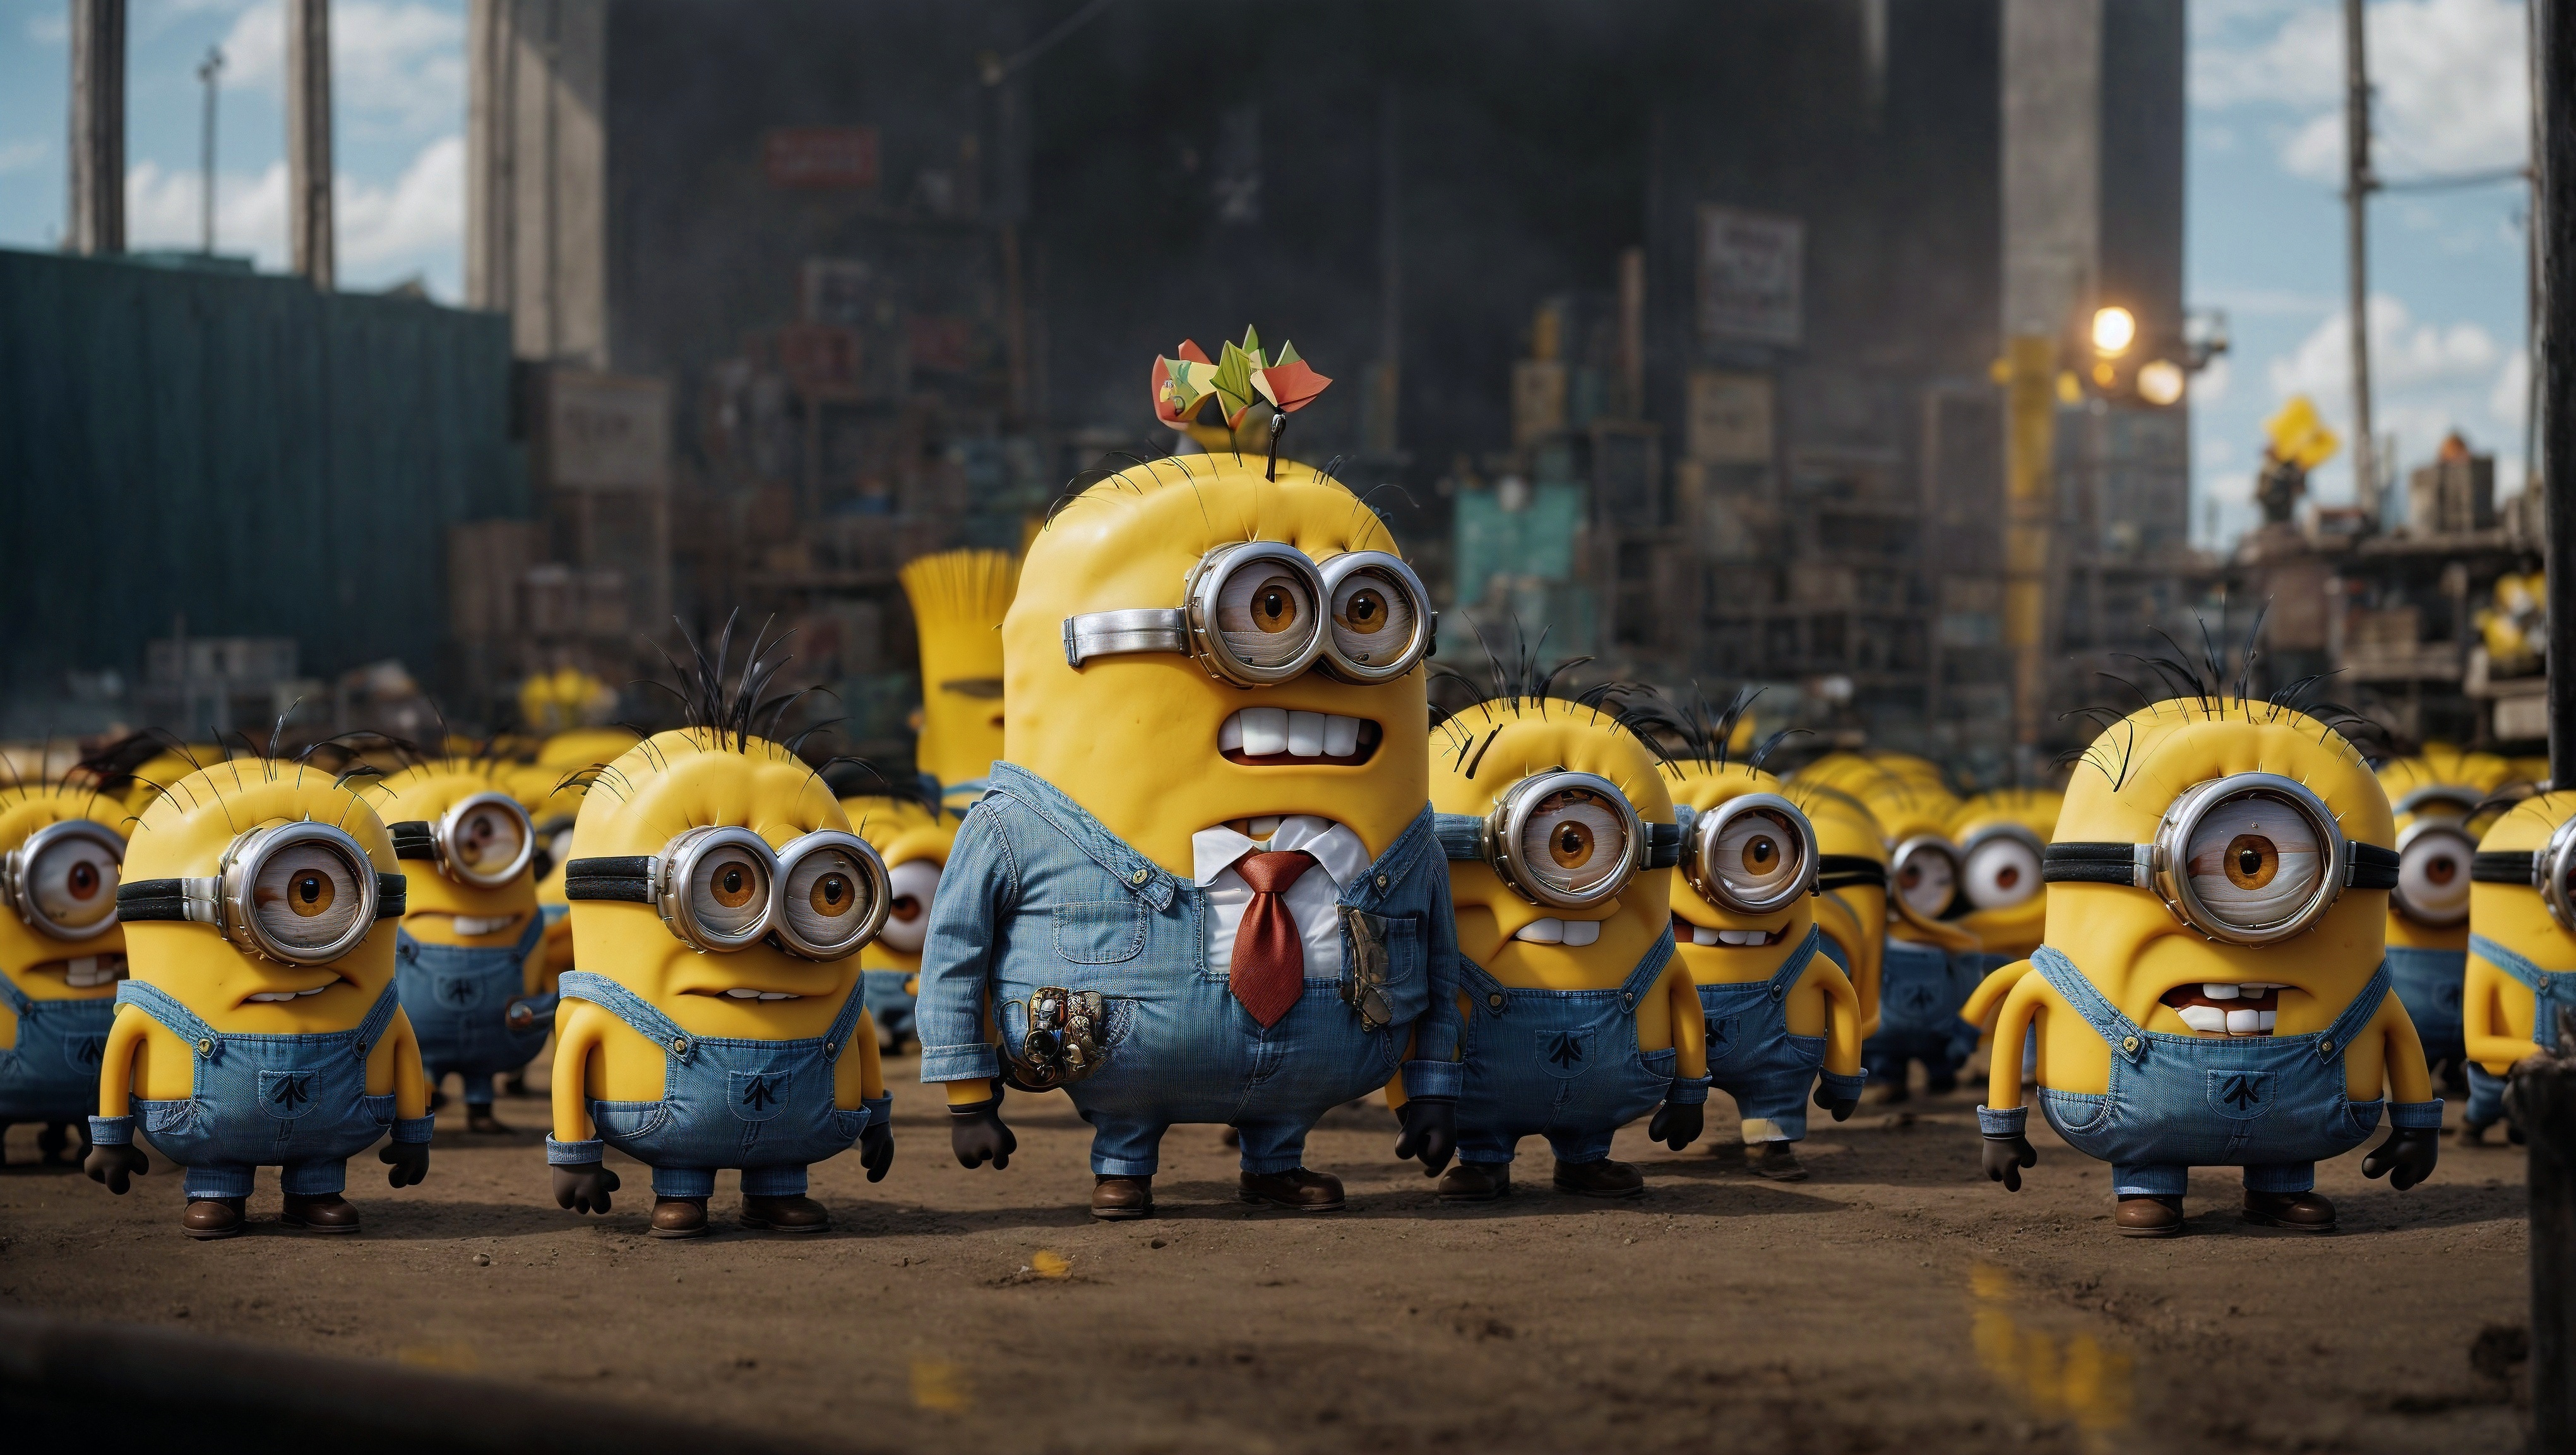 Free photo It`s the minion gang scene from the movie Despicable.